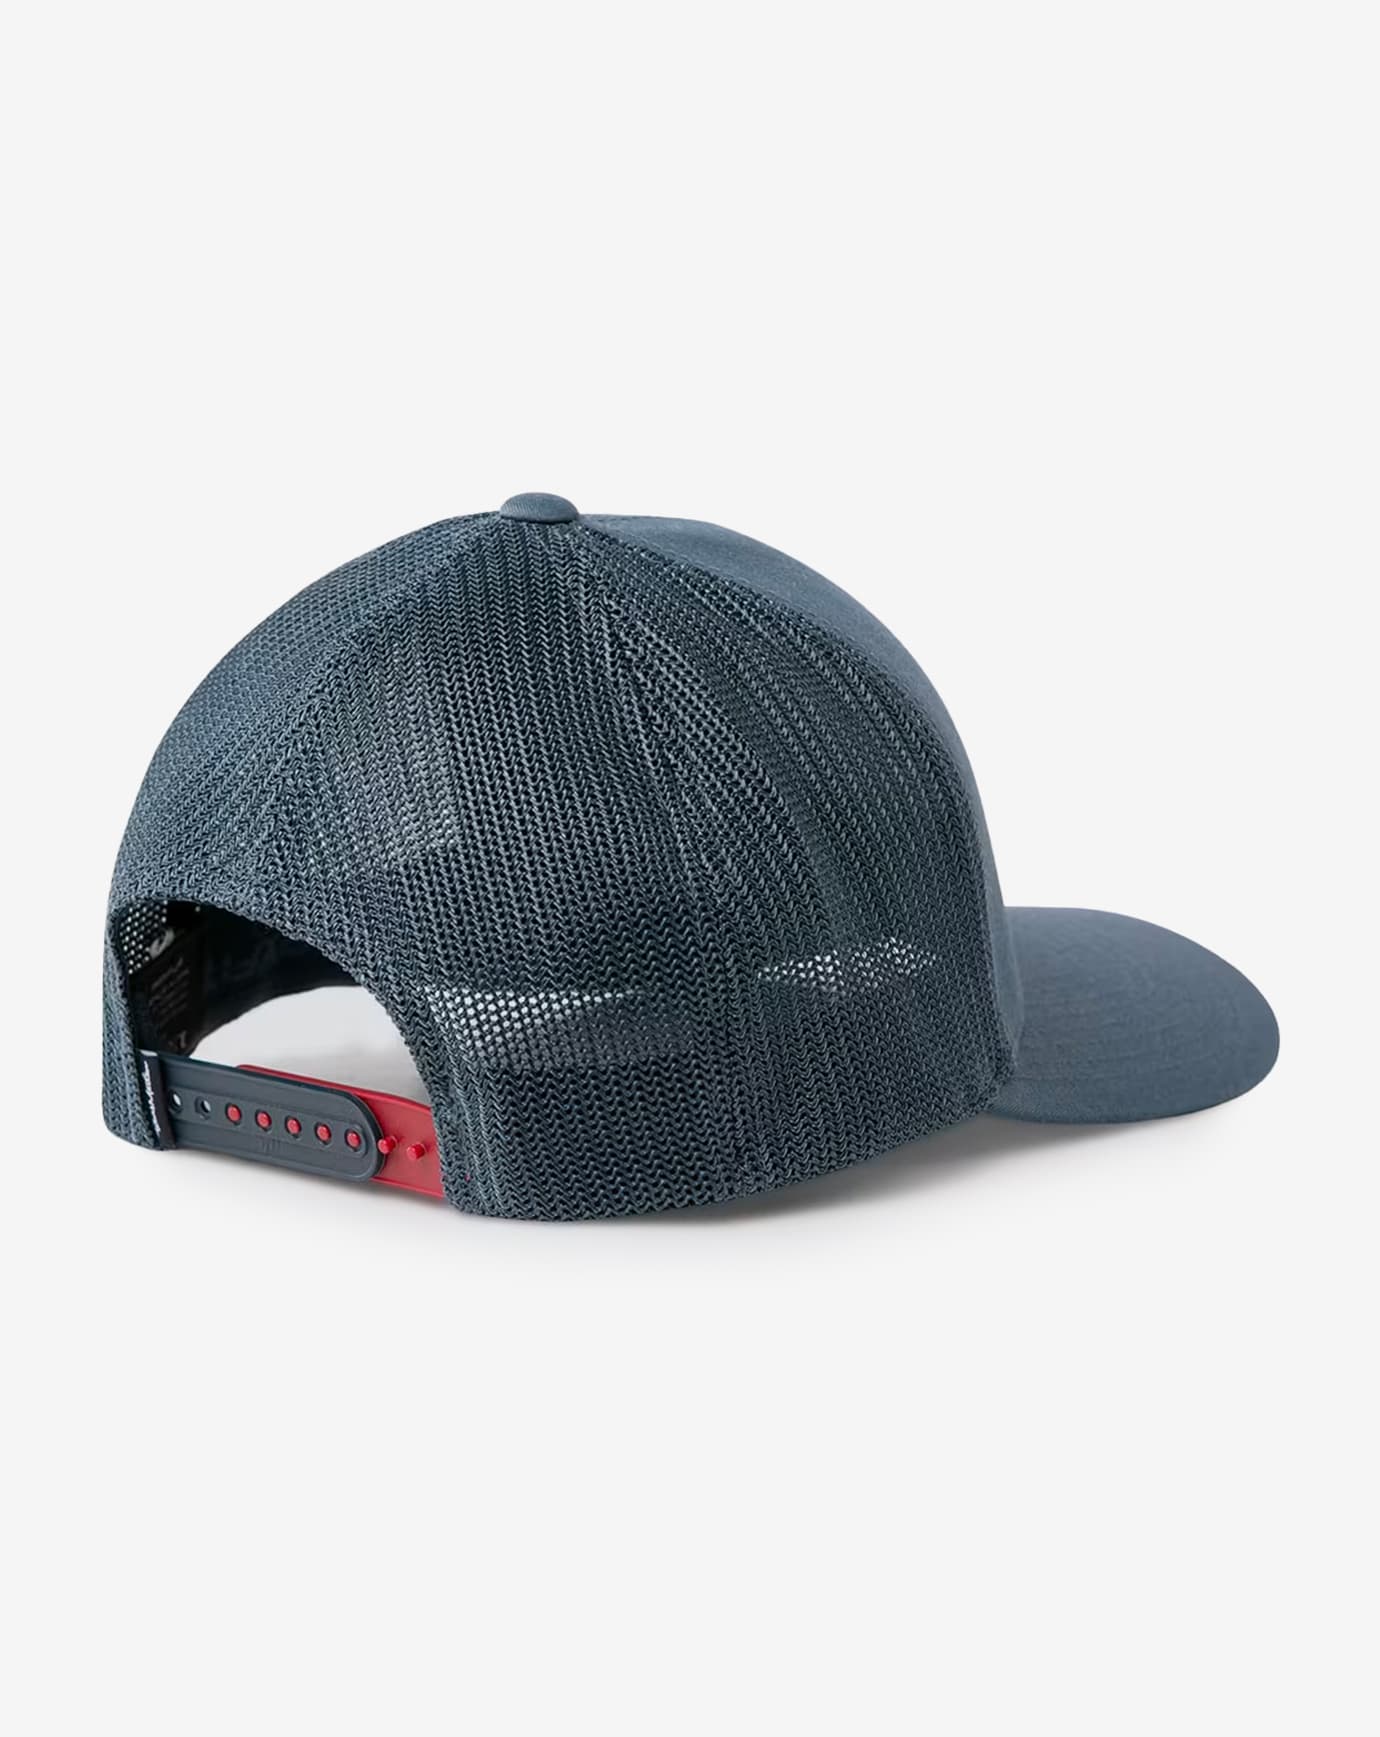 THE PATCH SNAPBACK HAT Image Thumbnail 3